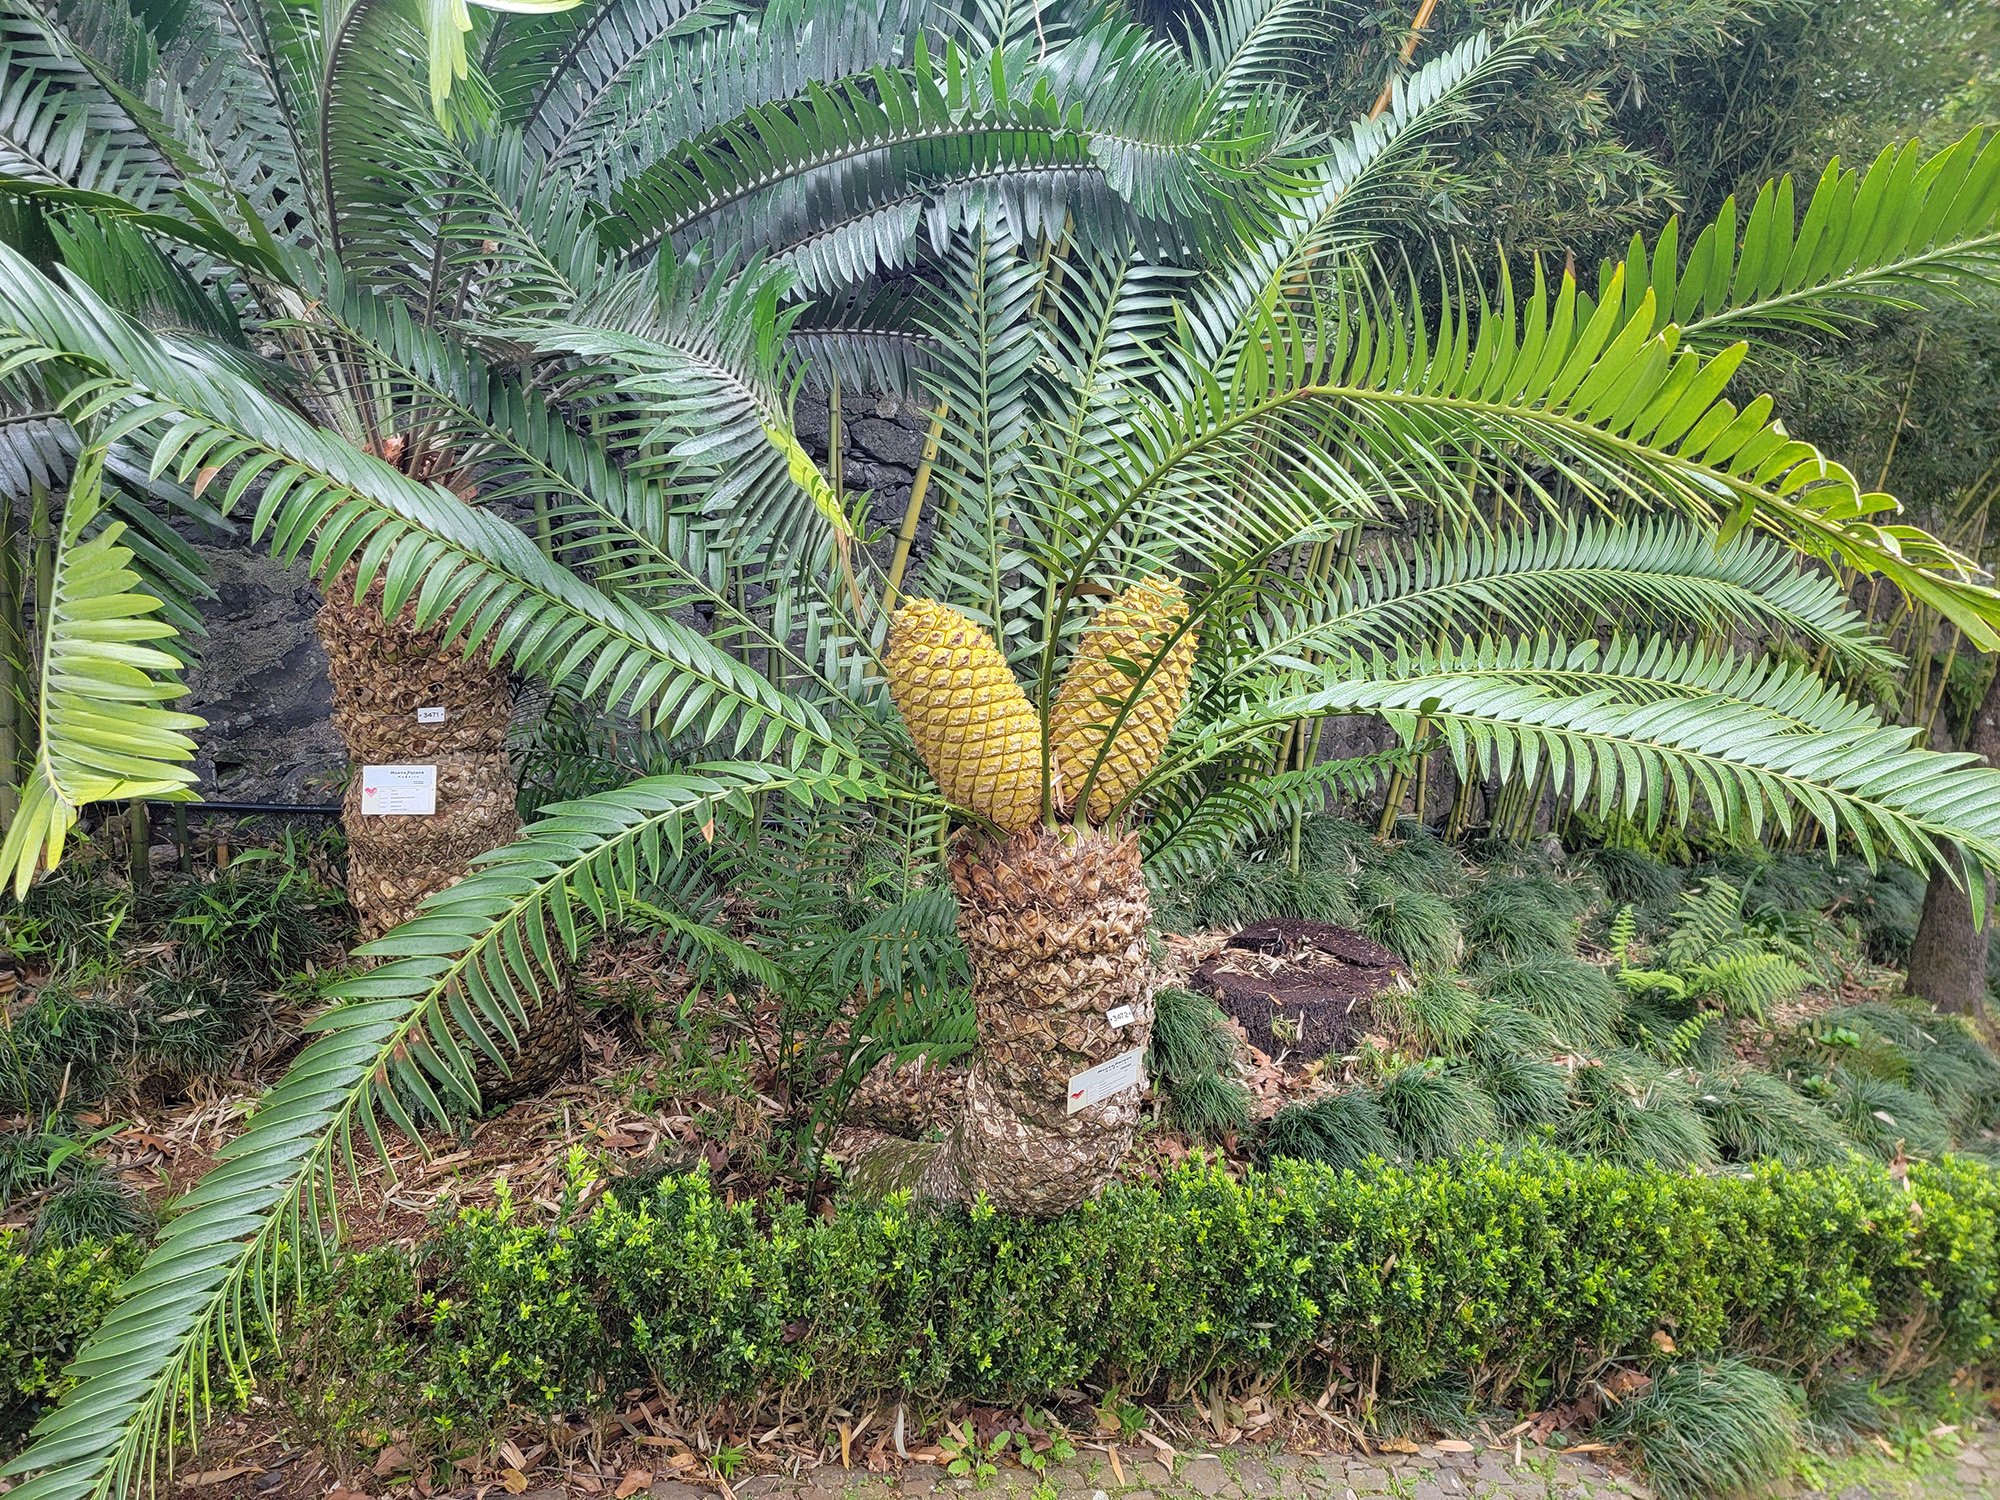 There's a section of cycads, aka dinosaur trees since these date back millions and millions of years.